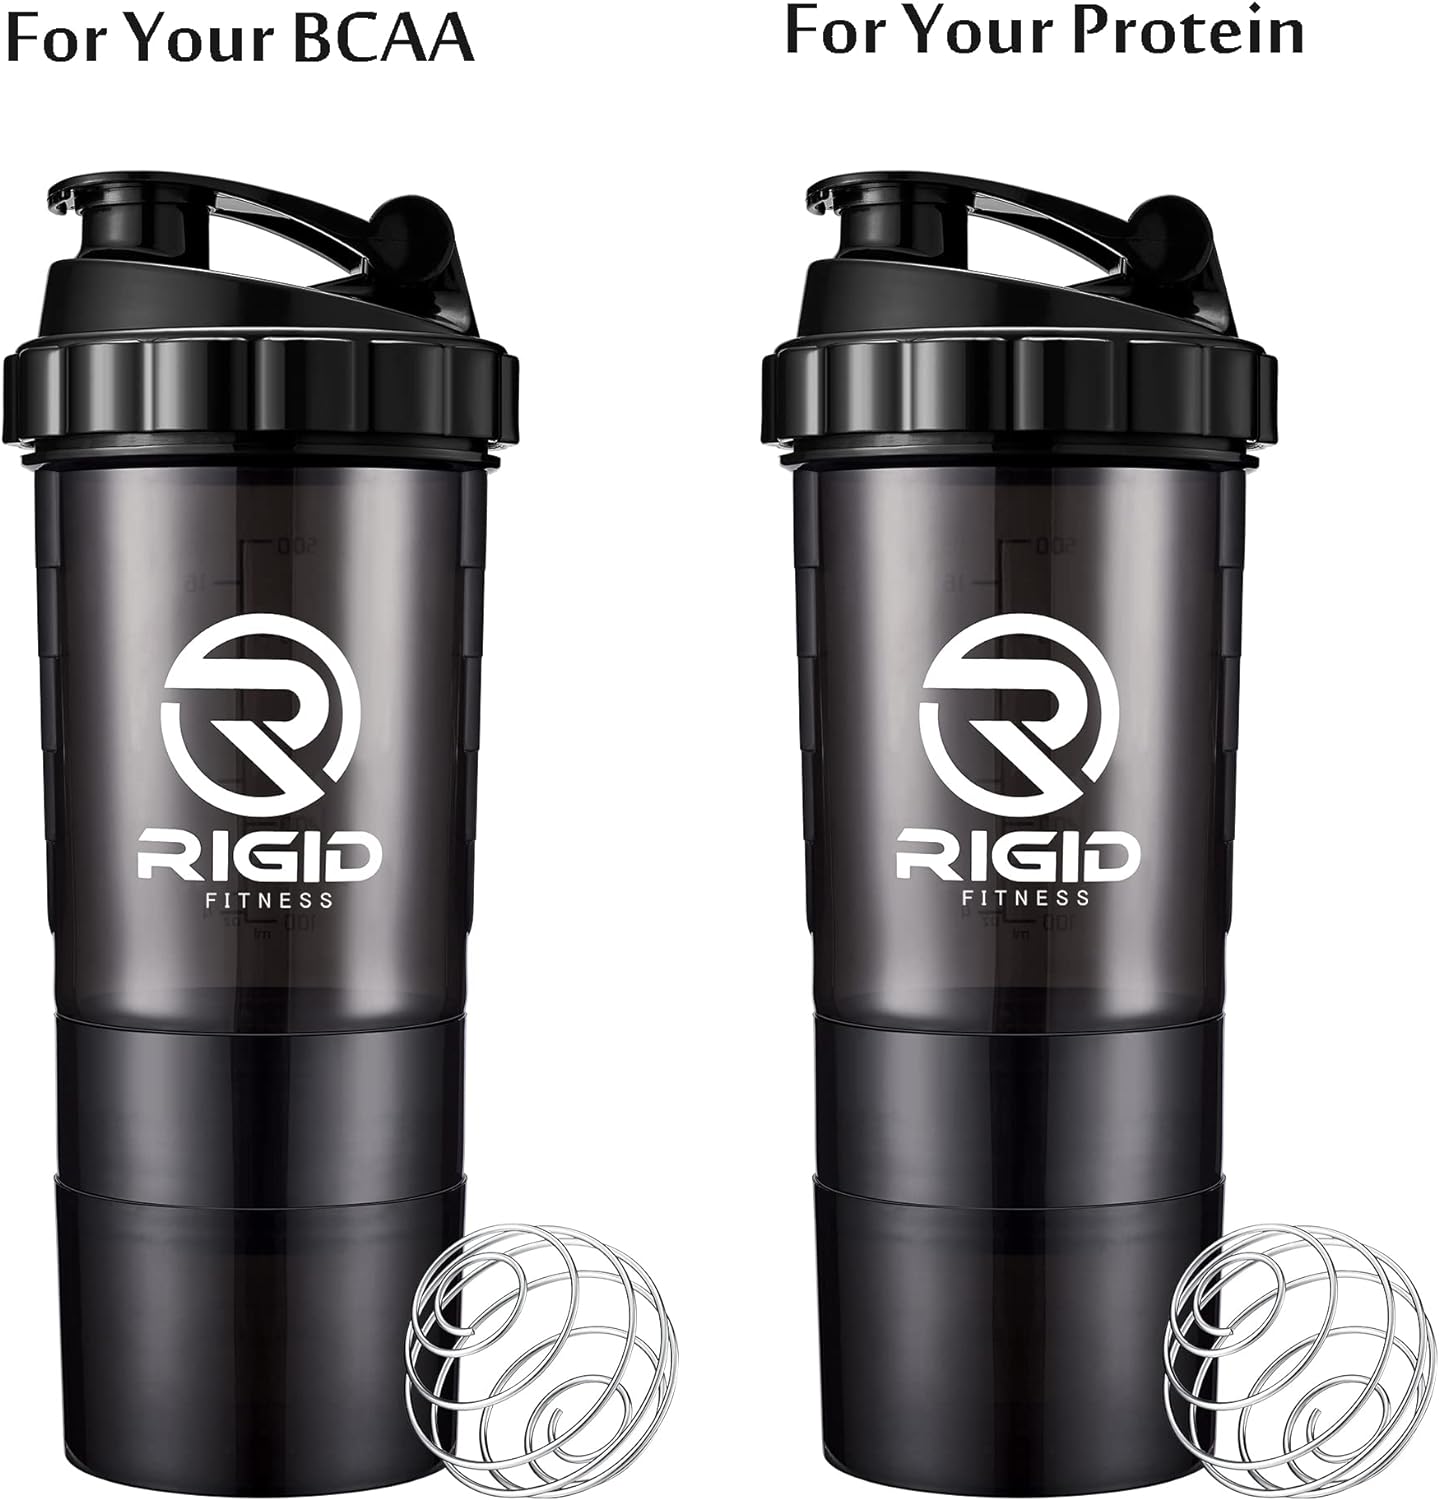 RIGID FITNESS (2 Pack) Protein Shaker Bottle x2 (500ml) Transparent - Leak-Proof Blender Bottle with Powder and Pill Storage Compartment - BPA Free Shaker